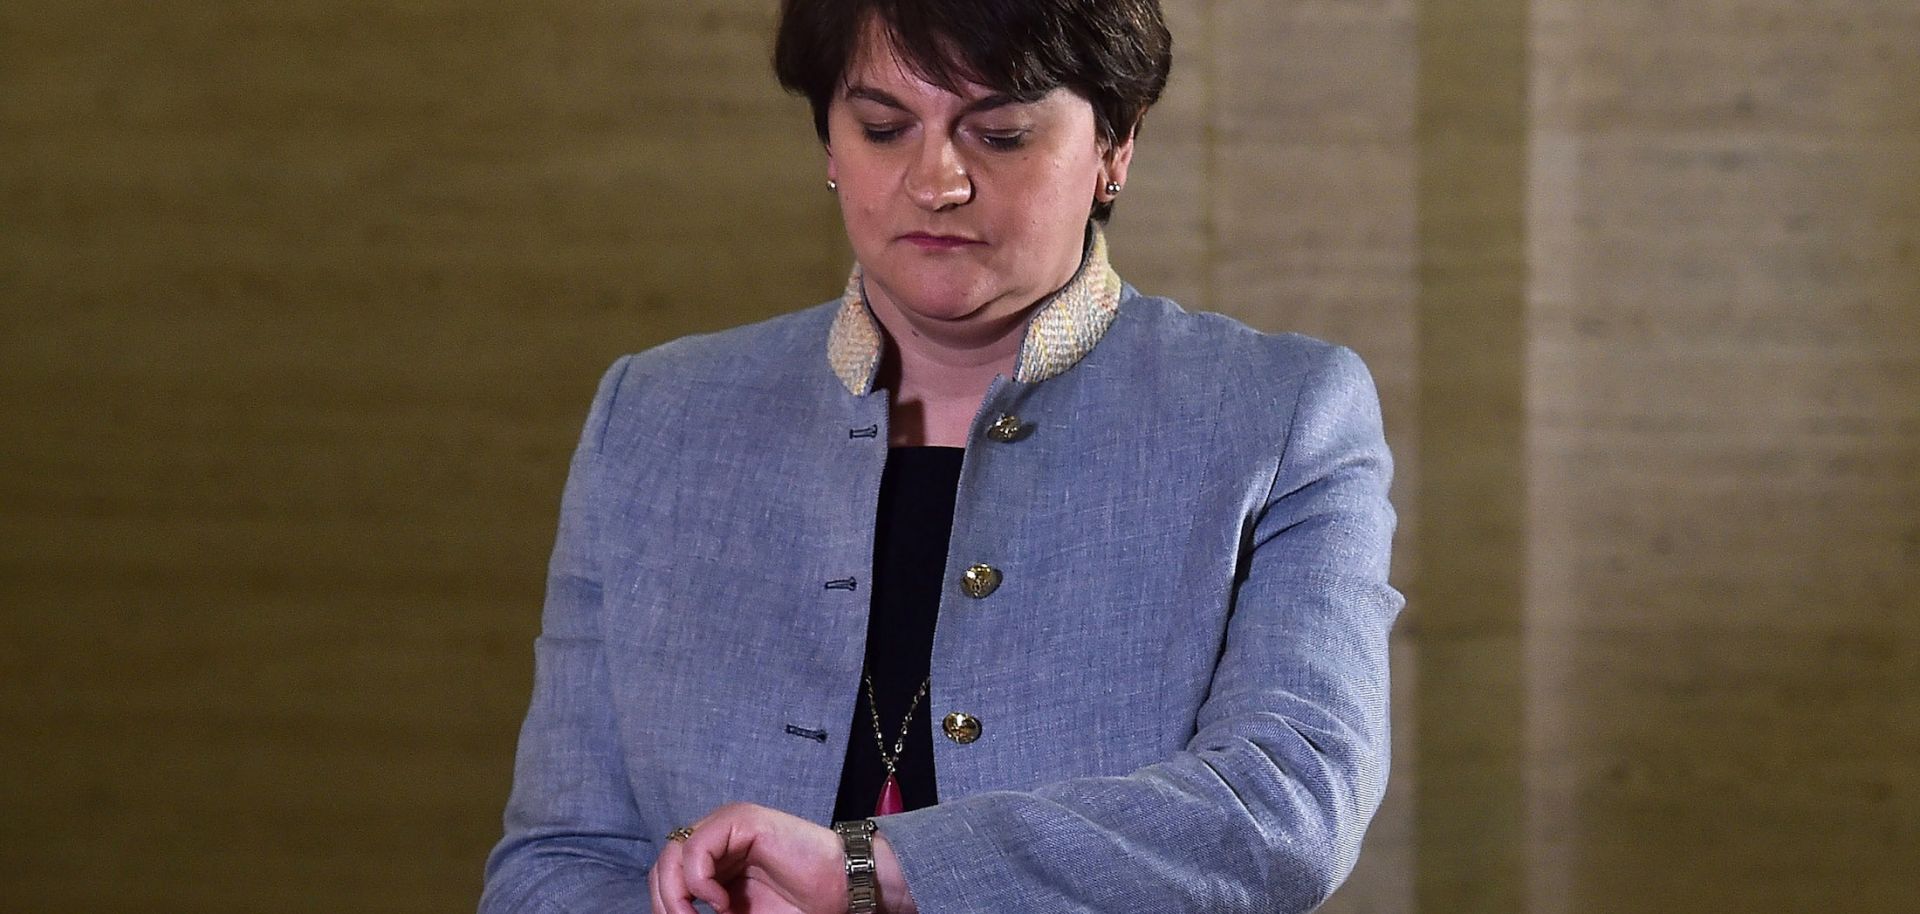 Northern Ireland’s first minister and leader of the Democratic Unionist Party (DUP), Arlene Foster, looks at her watch outside the Parliament Buildings in Belfast.